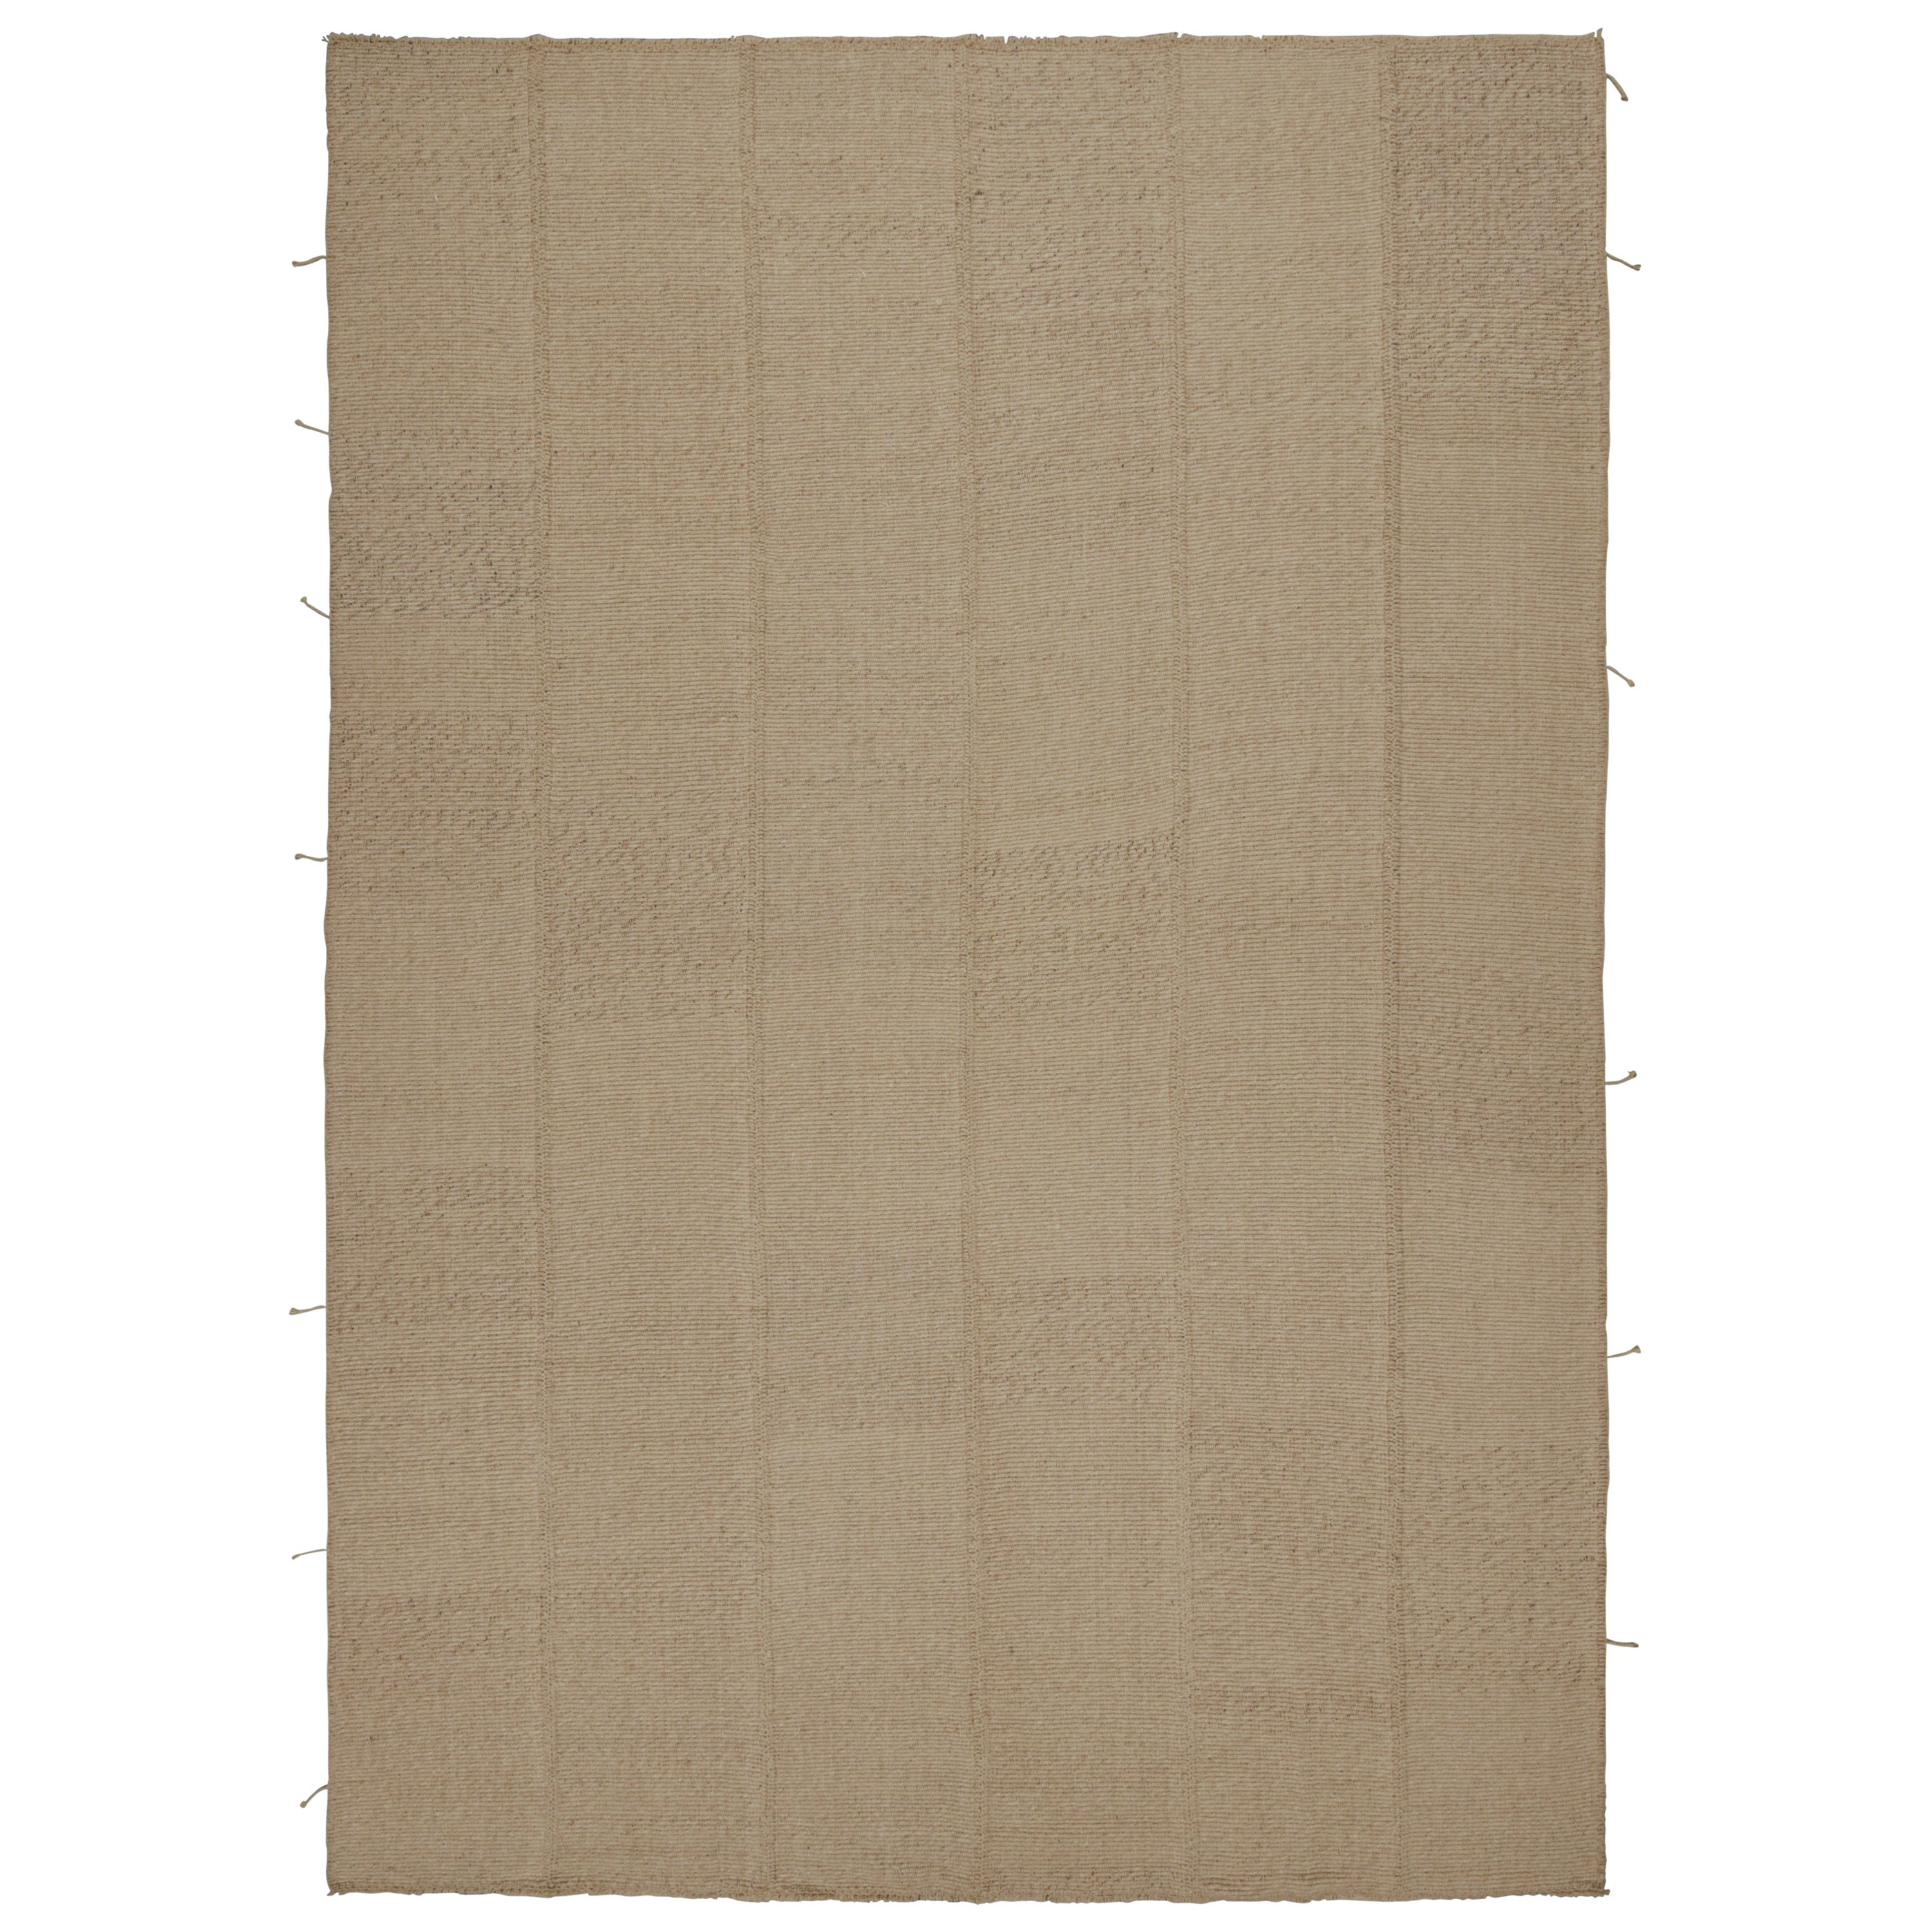 Rug & Kilim’s Contemporary Kilim in Beige with Muted Textural Stripes For Sale